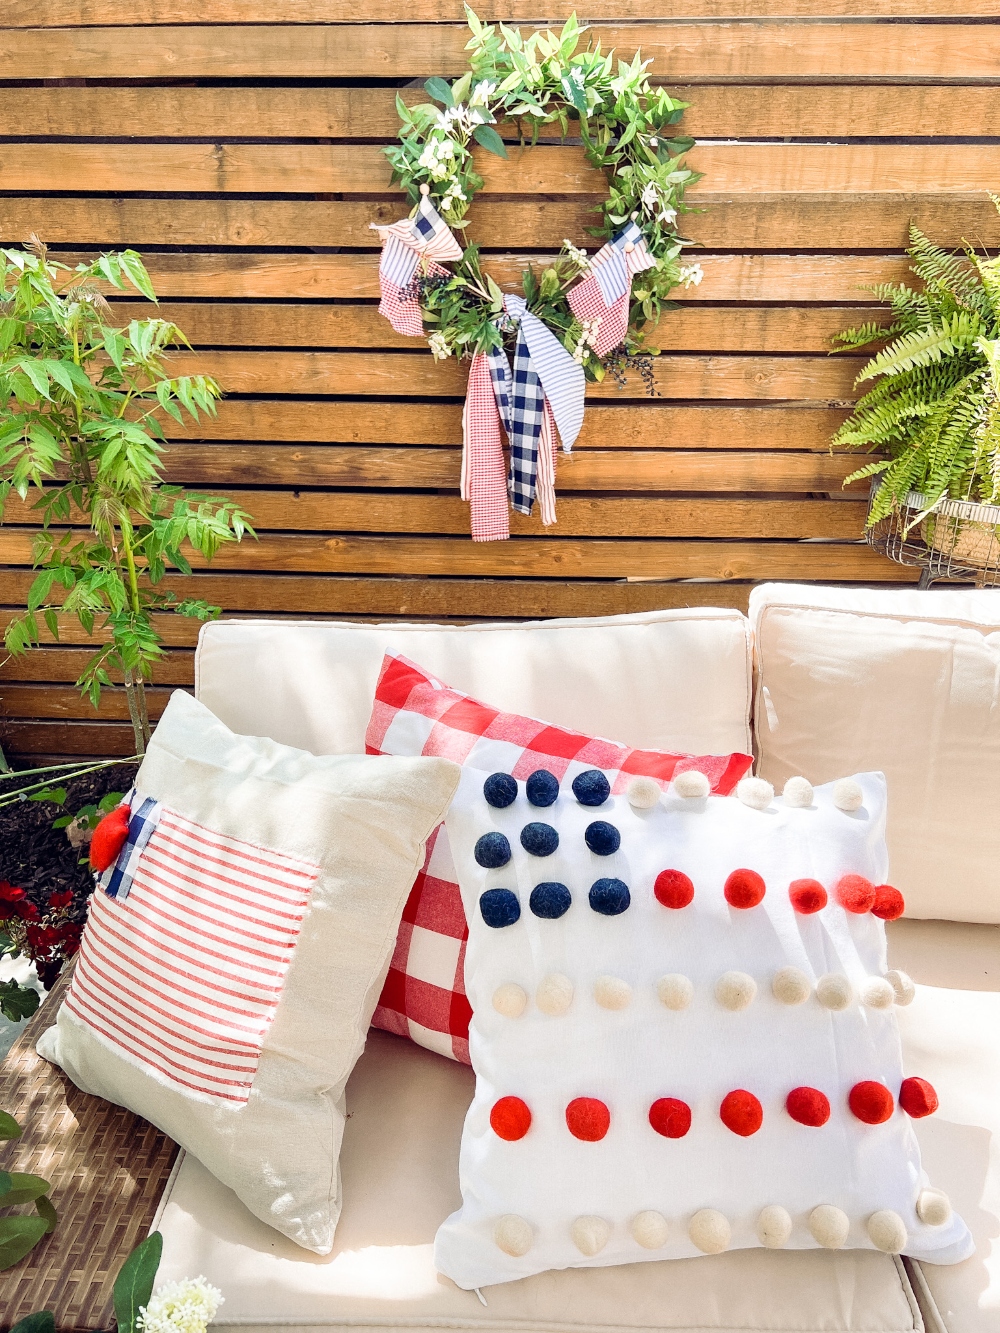 Two Easy Patriotic Pillow Covers. Add some summer patriotic charm to your home with these red white and blue no-sew pillow covers you can make in minutes!